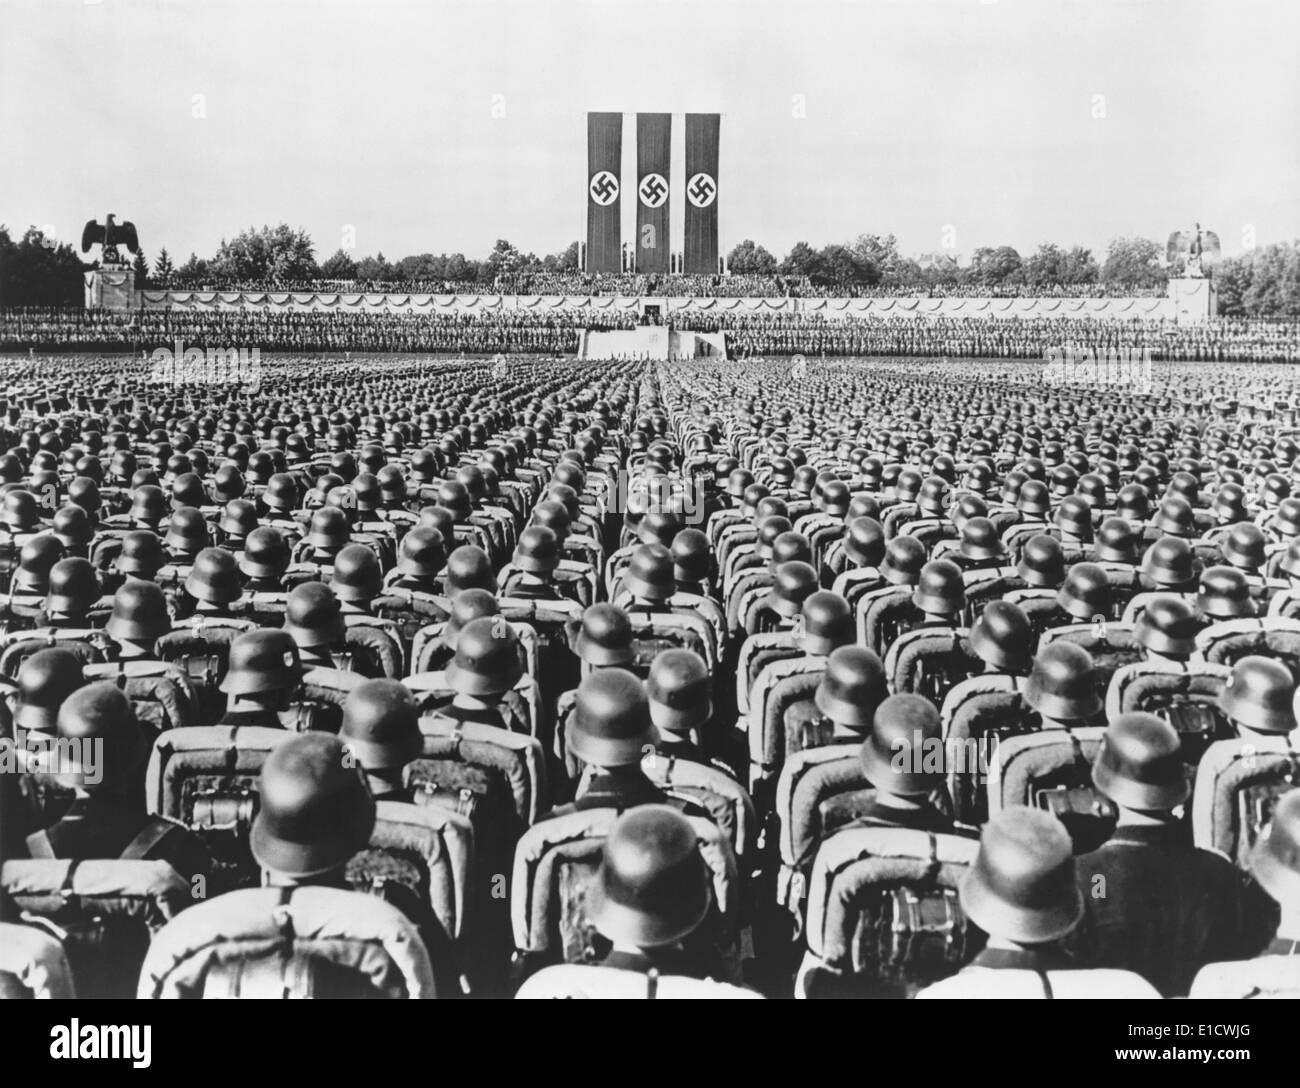 Nazi German Soldiers at the 1936 Nuremberg Rally, September 1936. (BSLOC_2014_7_6) Stock Photo